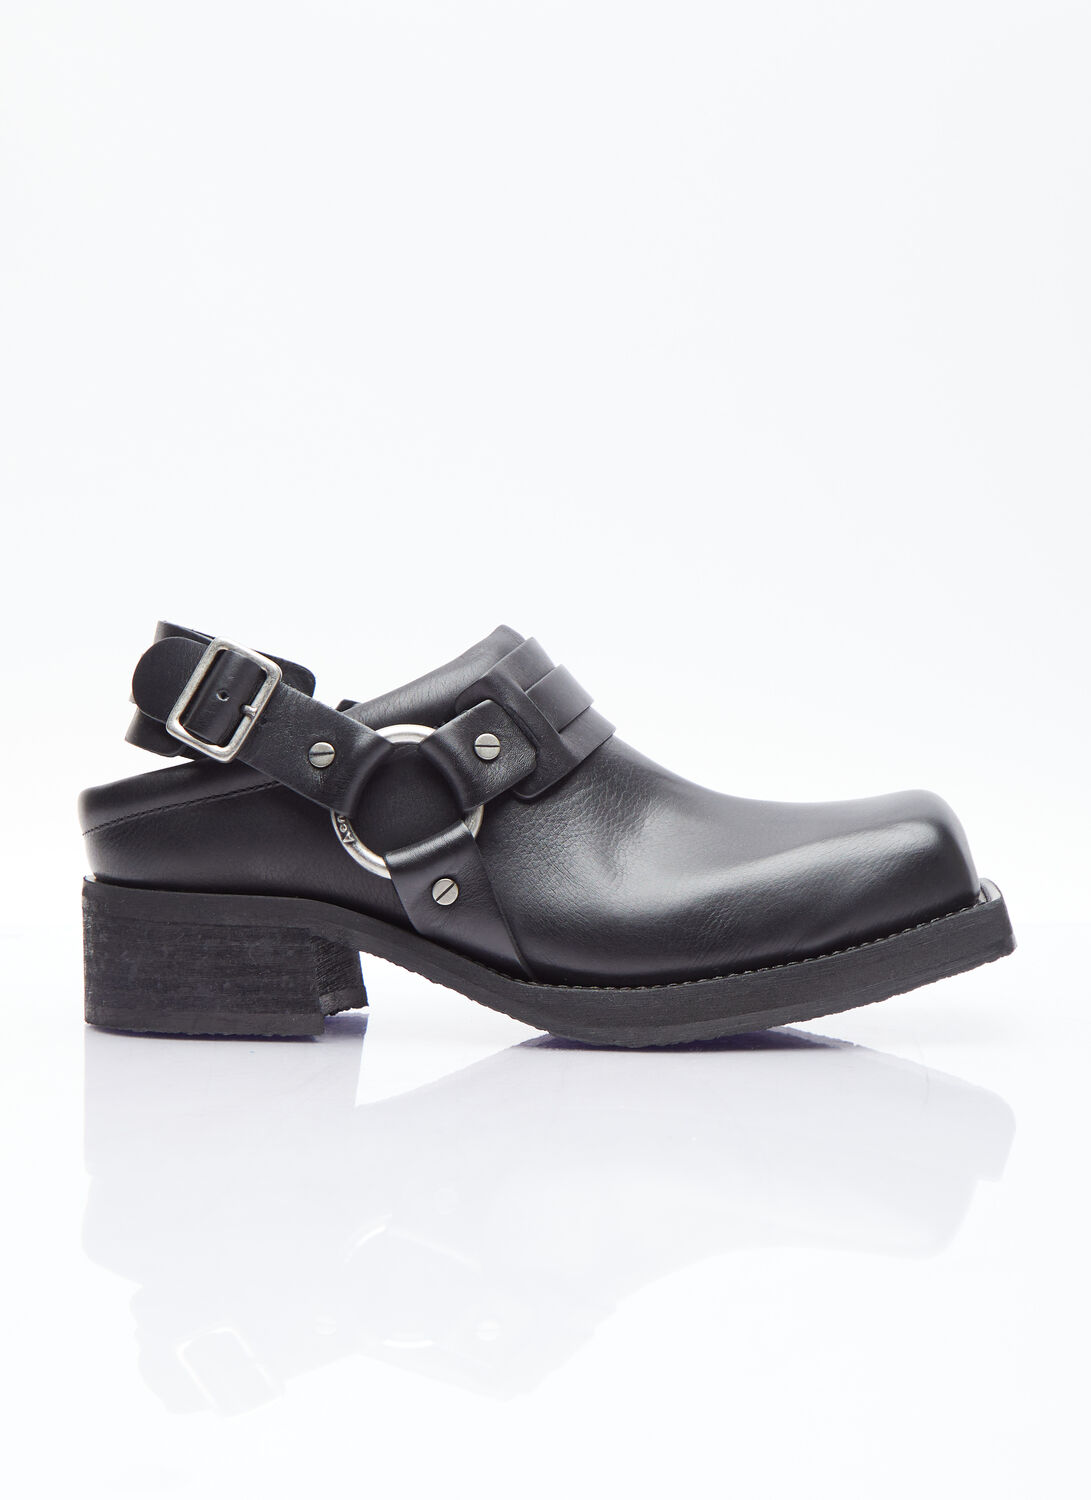 Acne Studios Buckle Leather Shoes In Black